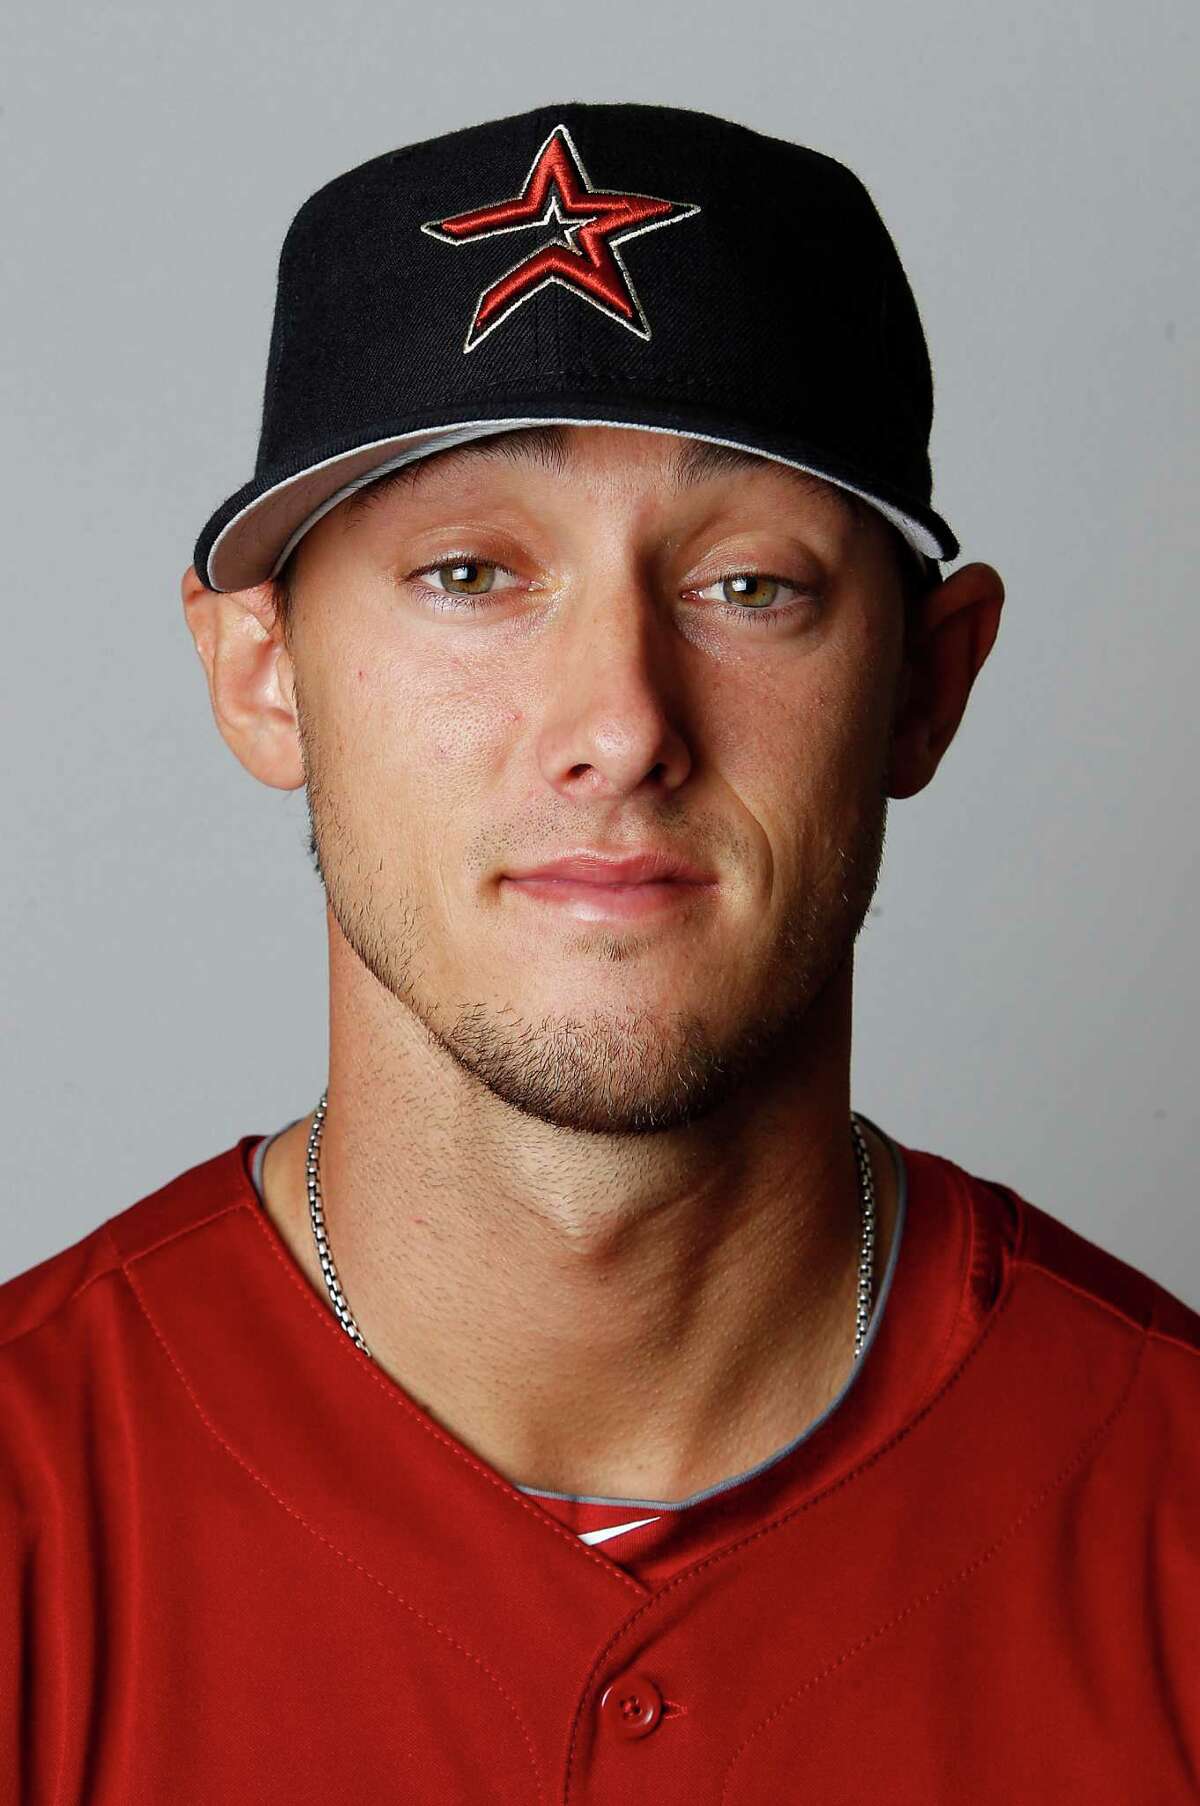 Houston Astros center fielder Jordan Schafer (1) photographed during photo day at the Astros spring training complex at Osceola County Stadium on Tuesday, Feb. 28, 2012, in Kissimmee. ( Karen Warren / Houston Chronicle )